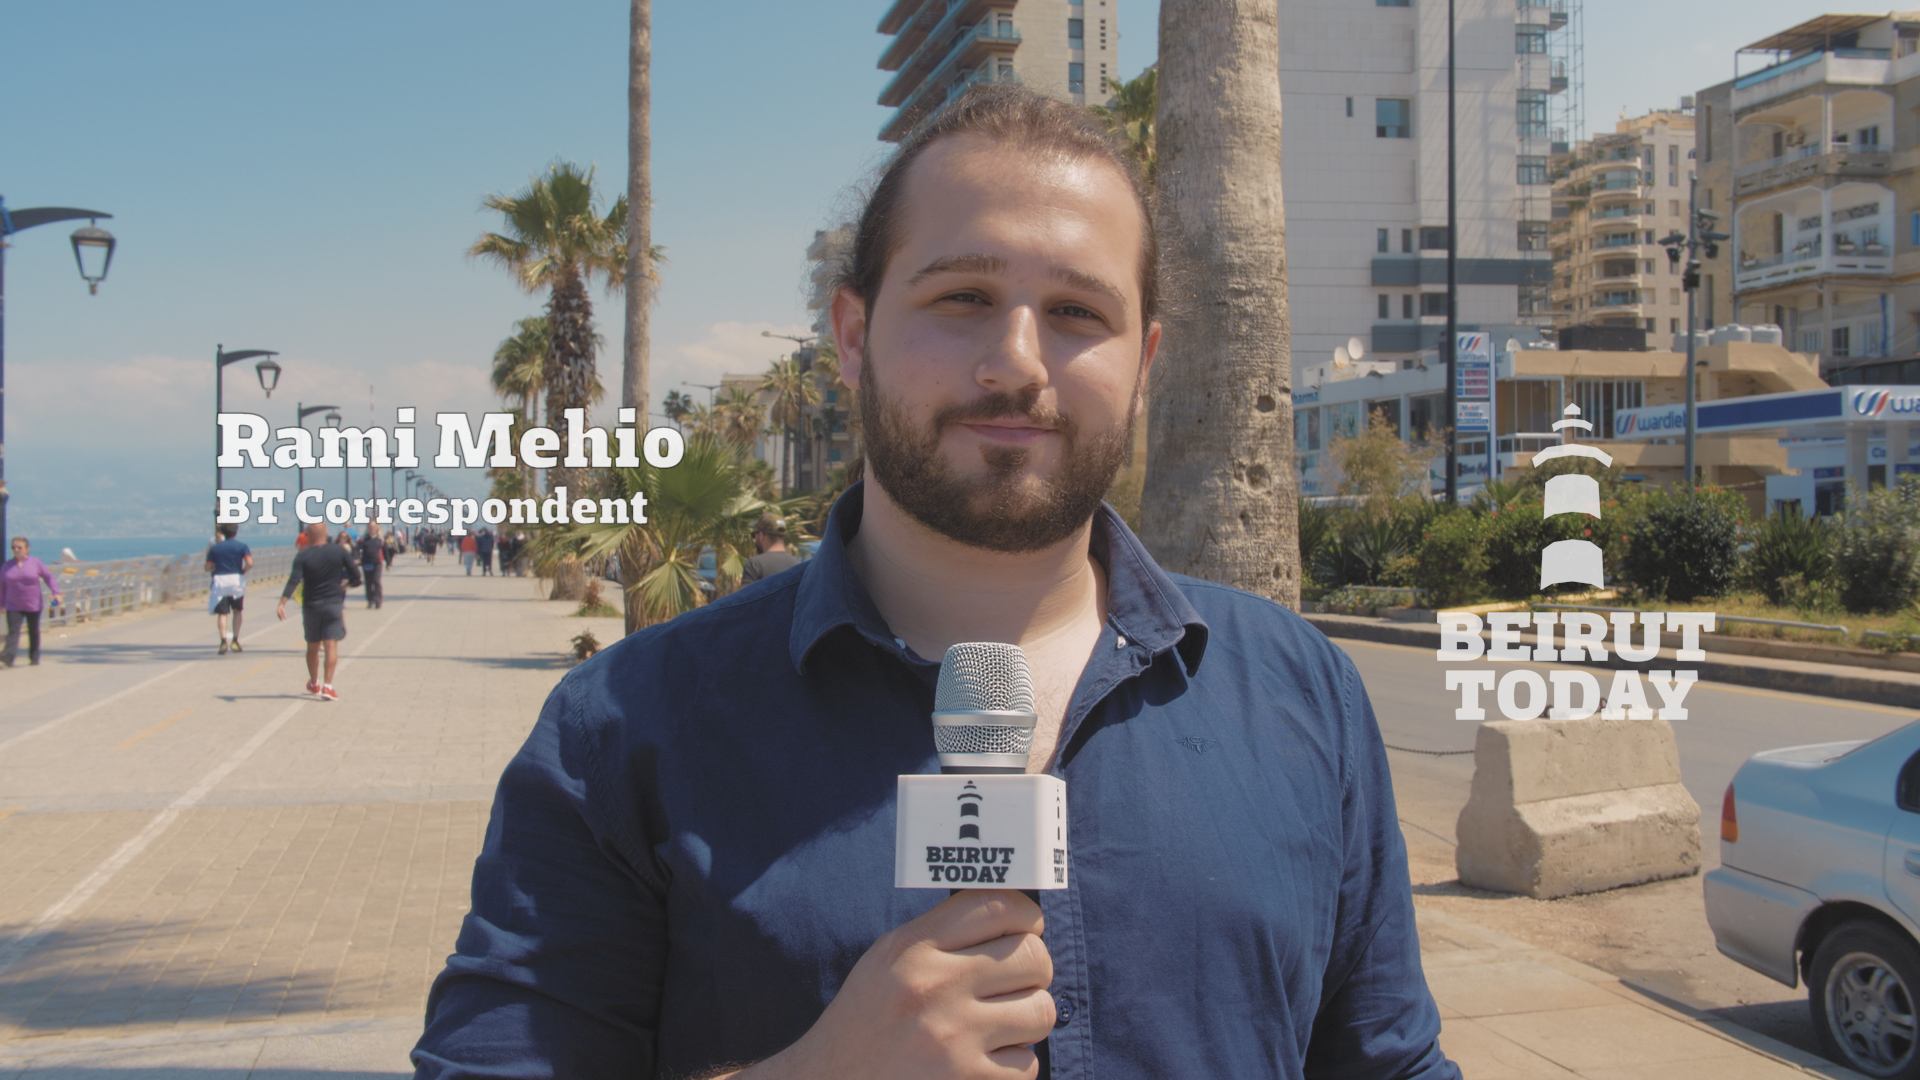 Elections 2018 Public Opinion: Manara - Beirut Today